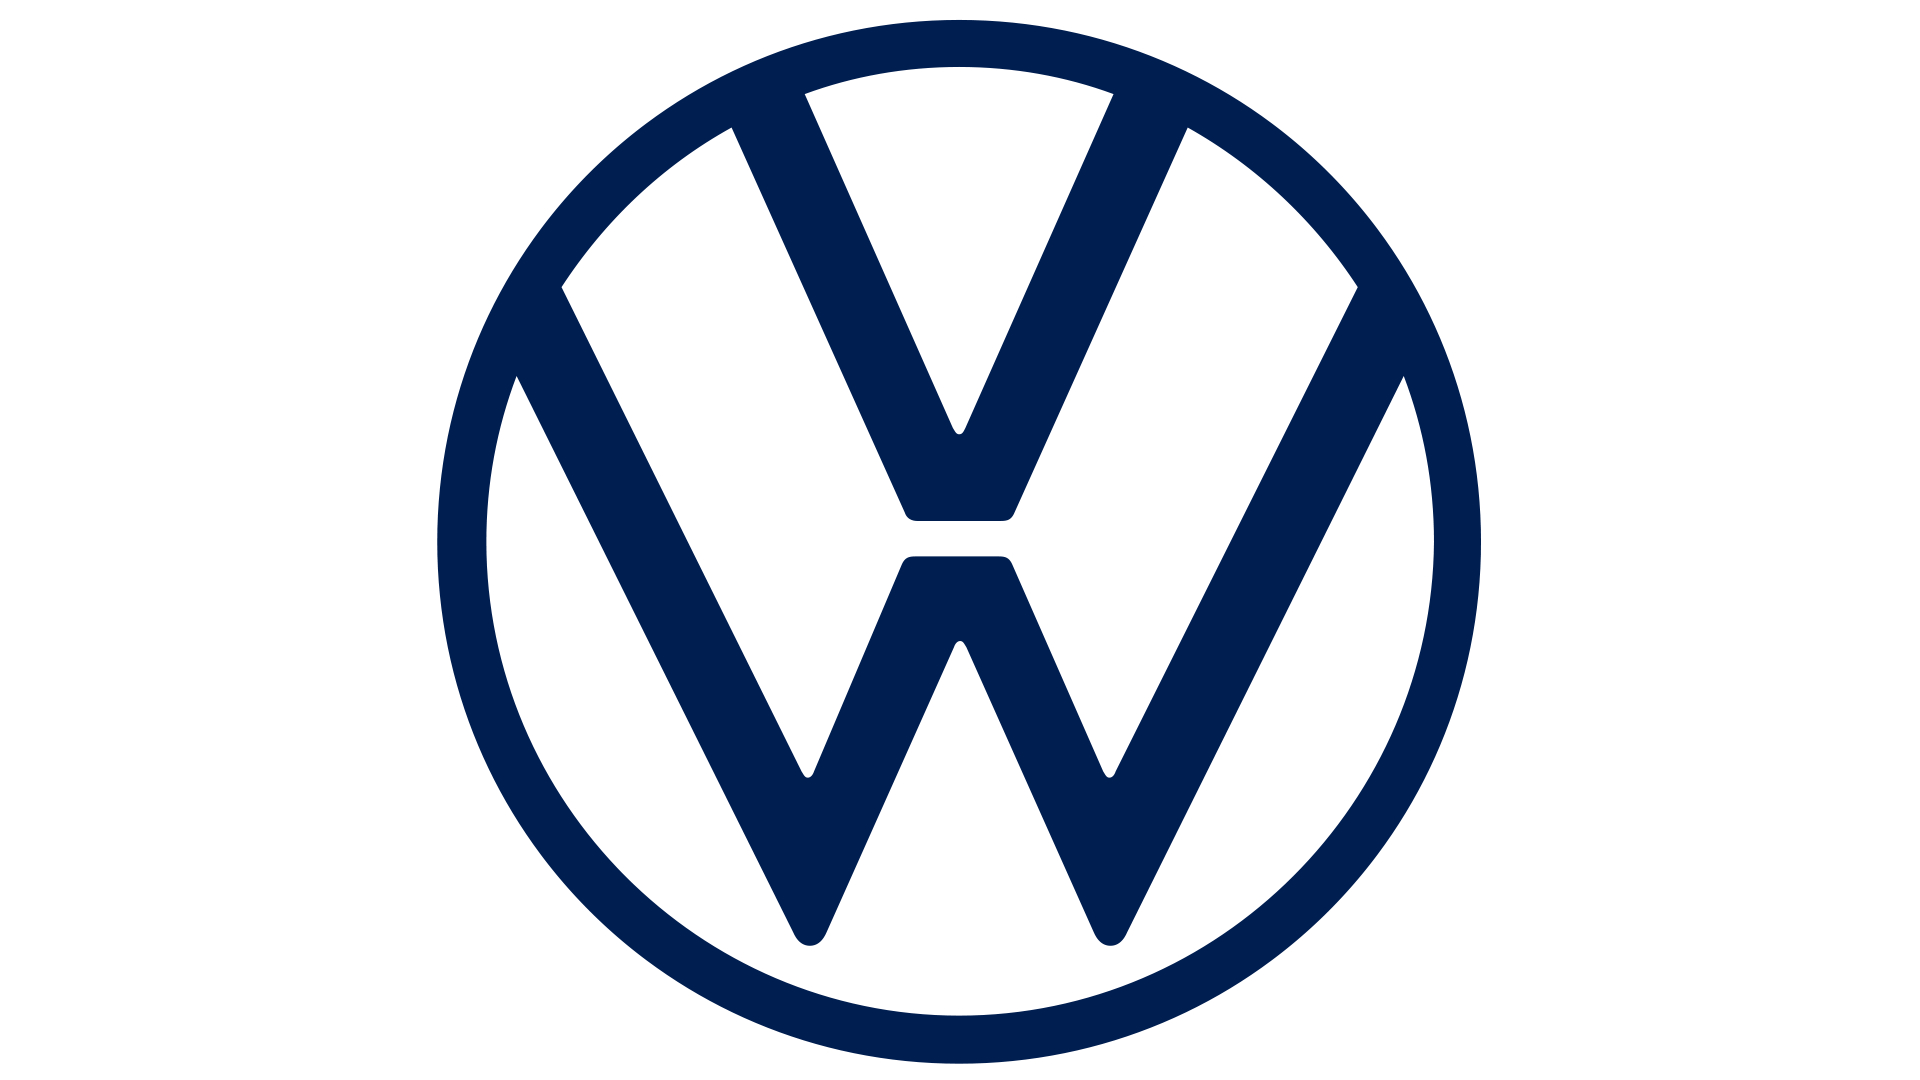 1920x1080 Volkswagen Logo, Volkswagen Car Symbol Meaning and History | Car brands car logos, meaning and symbol